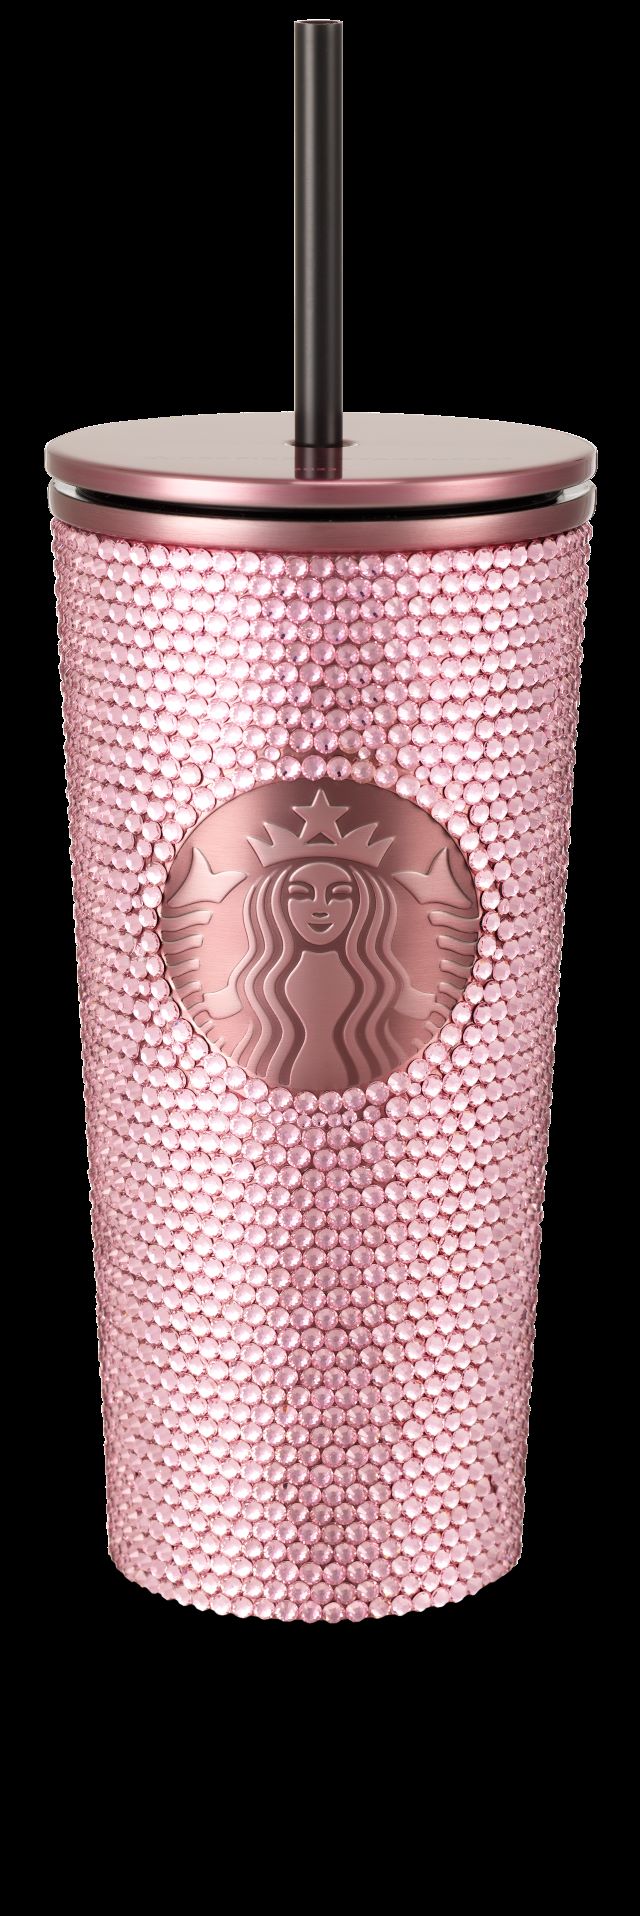 First Look at the BLACKPINK x Starbucks Collection: Details